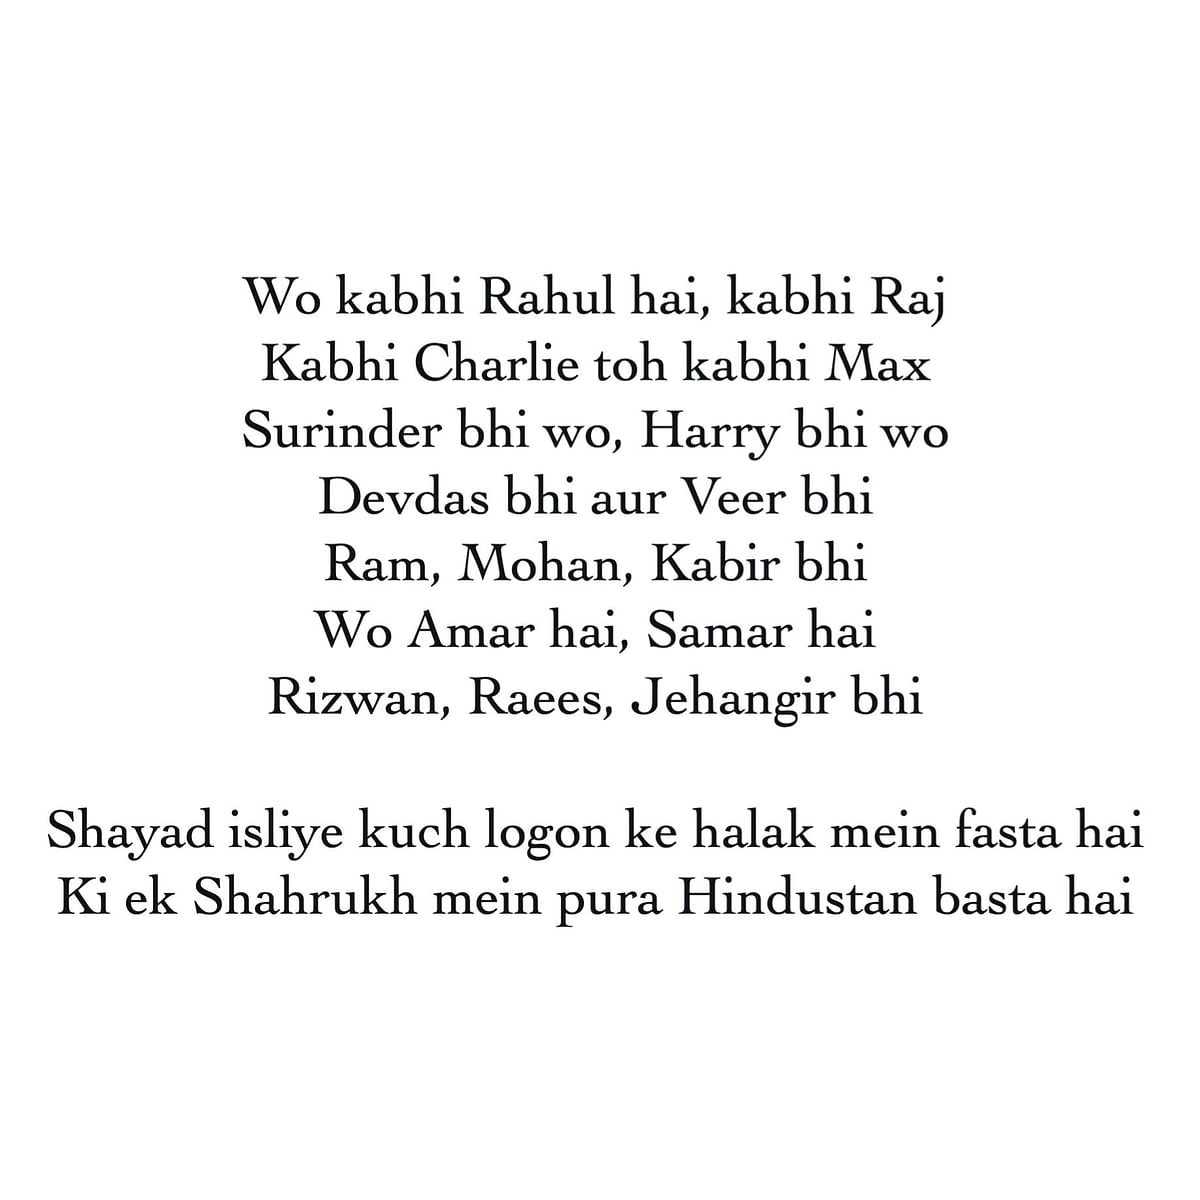 Akhil Katyal had shared a poem as tribute for Shah Rukh Khan and his many roles over the years.